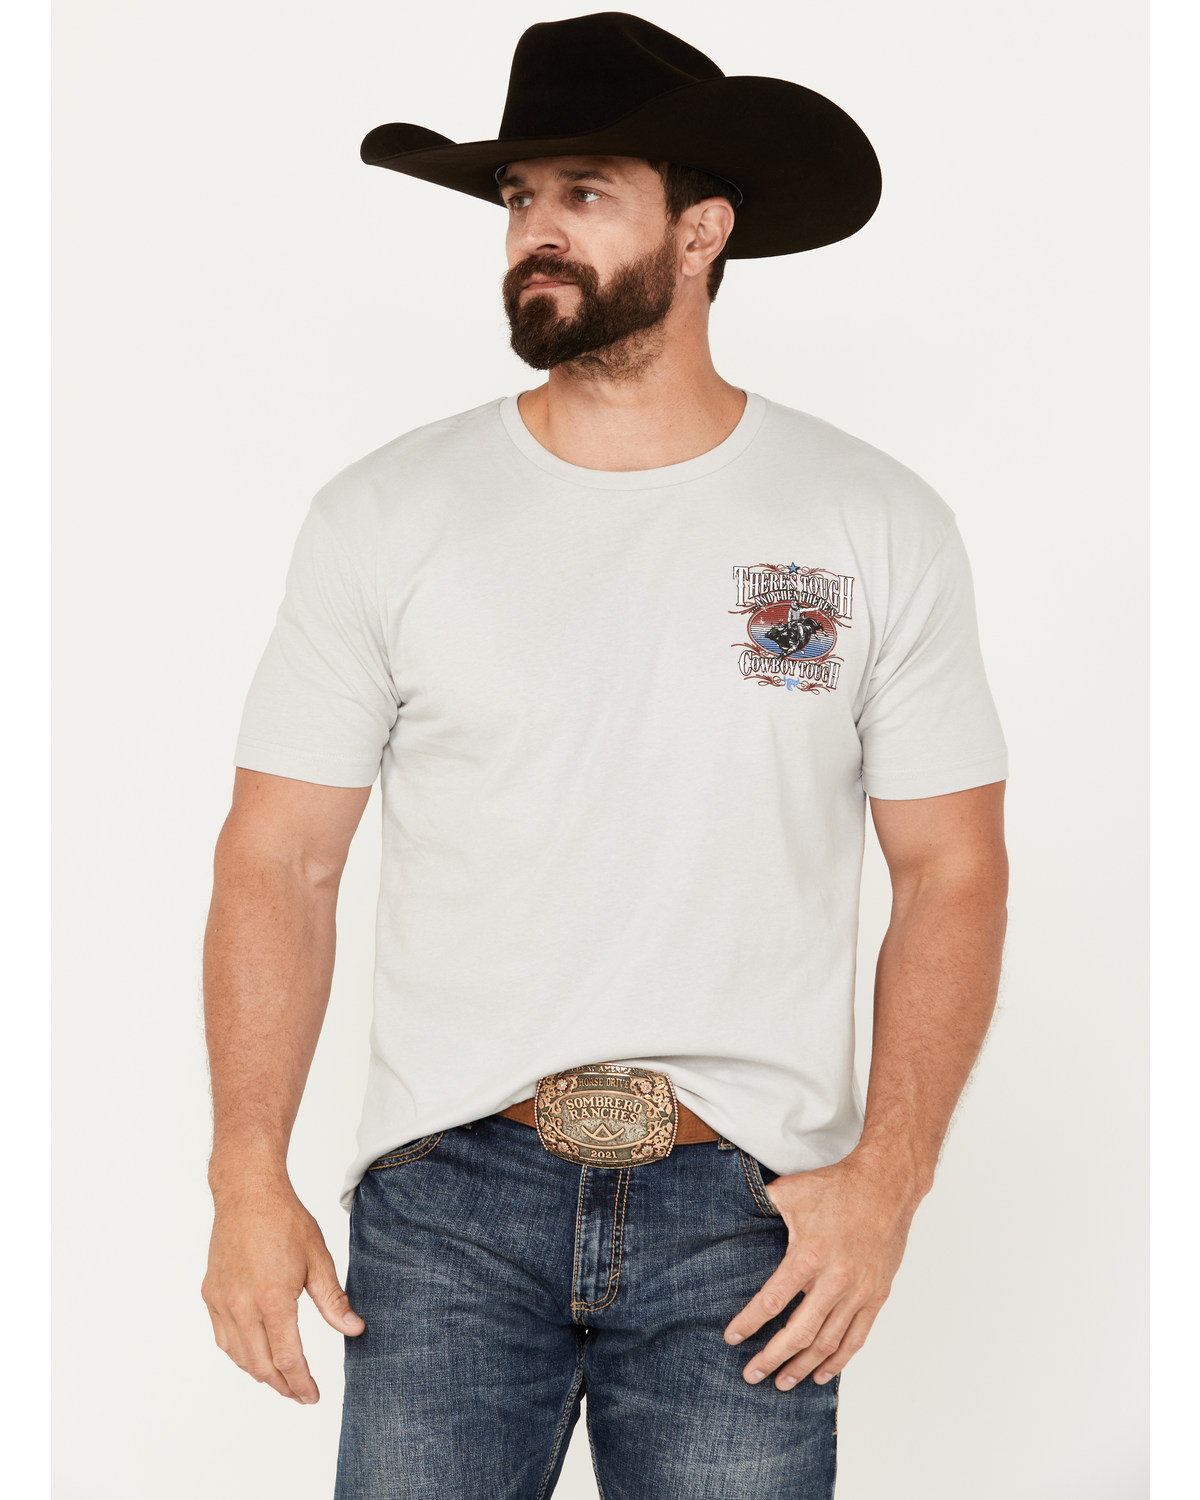 Cowboy Hardware Men's There's Tough Short Sleeve Graphic T-Shirt